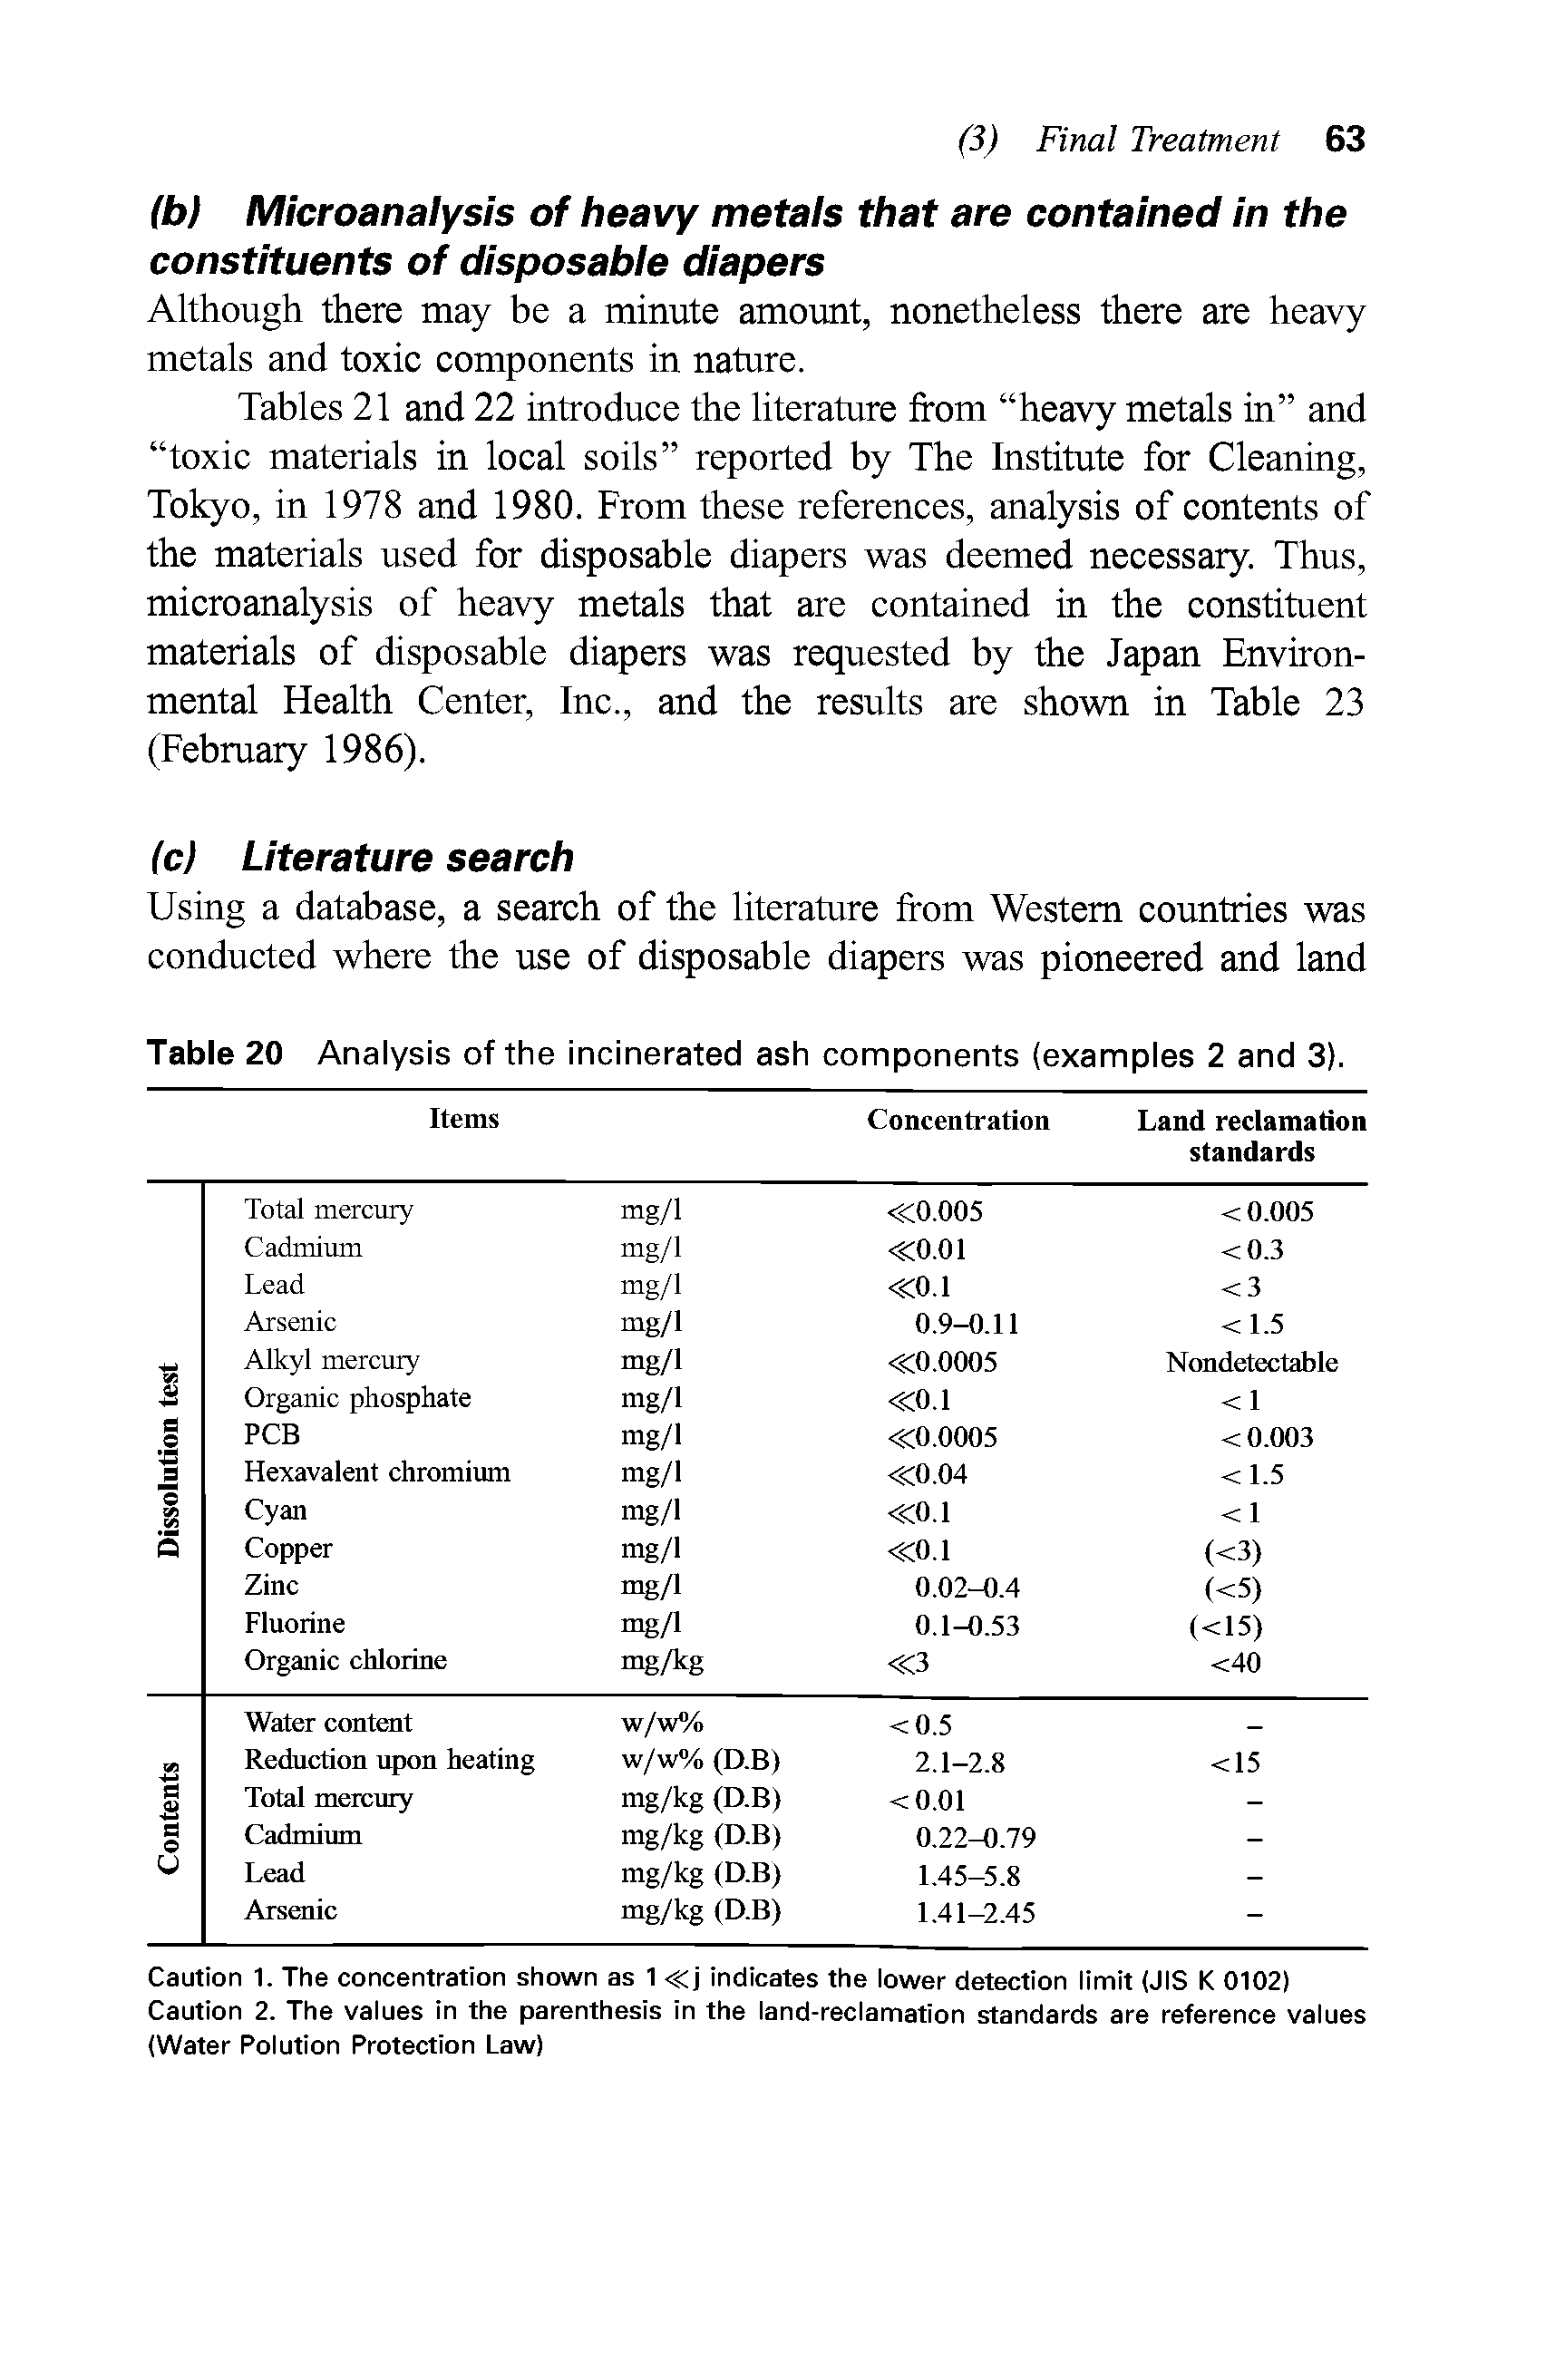 Tables 21 and 22 introduce the literature from heavy metals in and toxic materials in loeal soils reported by The Institute for Cleaning, Tokyo, in 1978 and 1980. From these references, analysis of eontents of the materials used for disposable diapers was deemed neeessary. Thus, microanalysis of heavy metals that are contained in the constituent materials of disposable diapers was requested by the Japan Environmental Health Center, Inc., and the results are shown in Table 23 (February 1986).